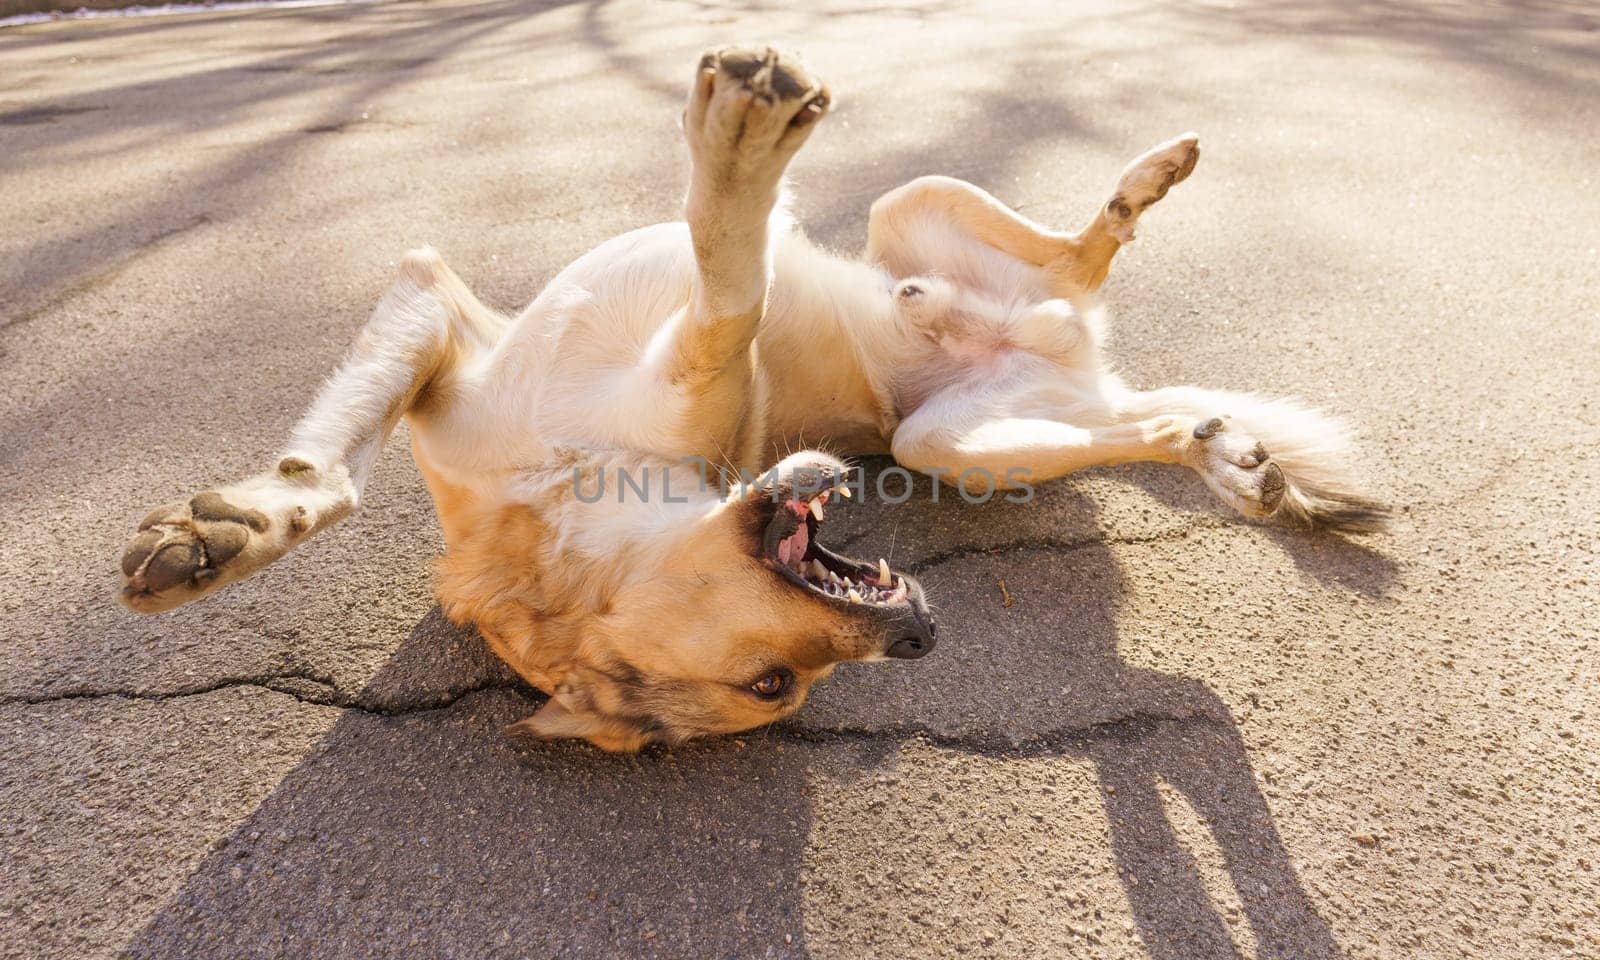 Dogs and people special bond Concept. Happy dog lying on back, showing confidence and trust towards human. Strong connection can exist between humans and their canine companions. High quality photo. High quality photo